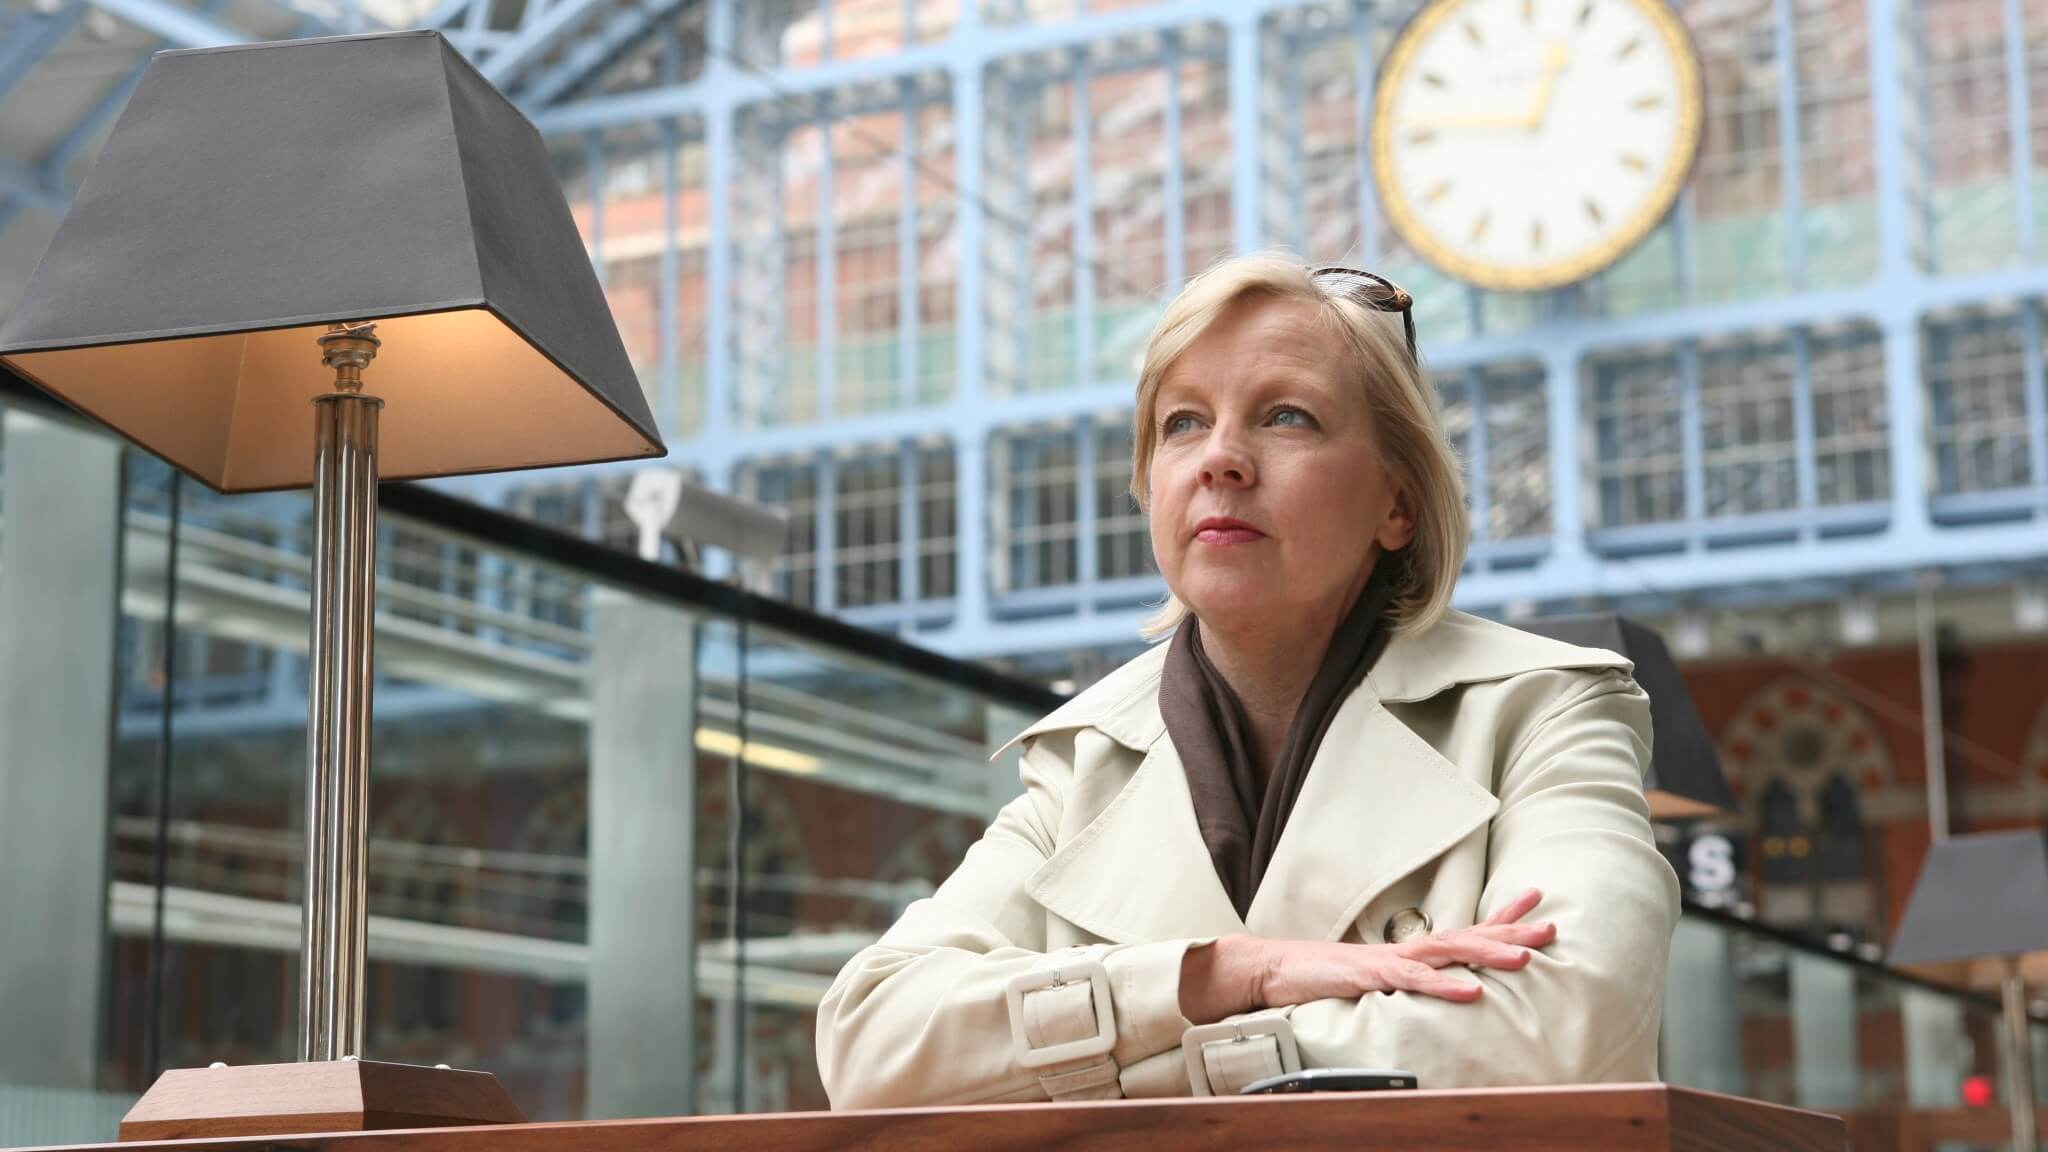 Deborah Meaden's 29 Businesses And Counting